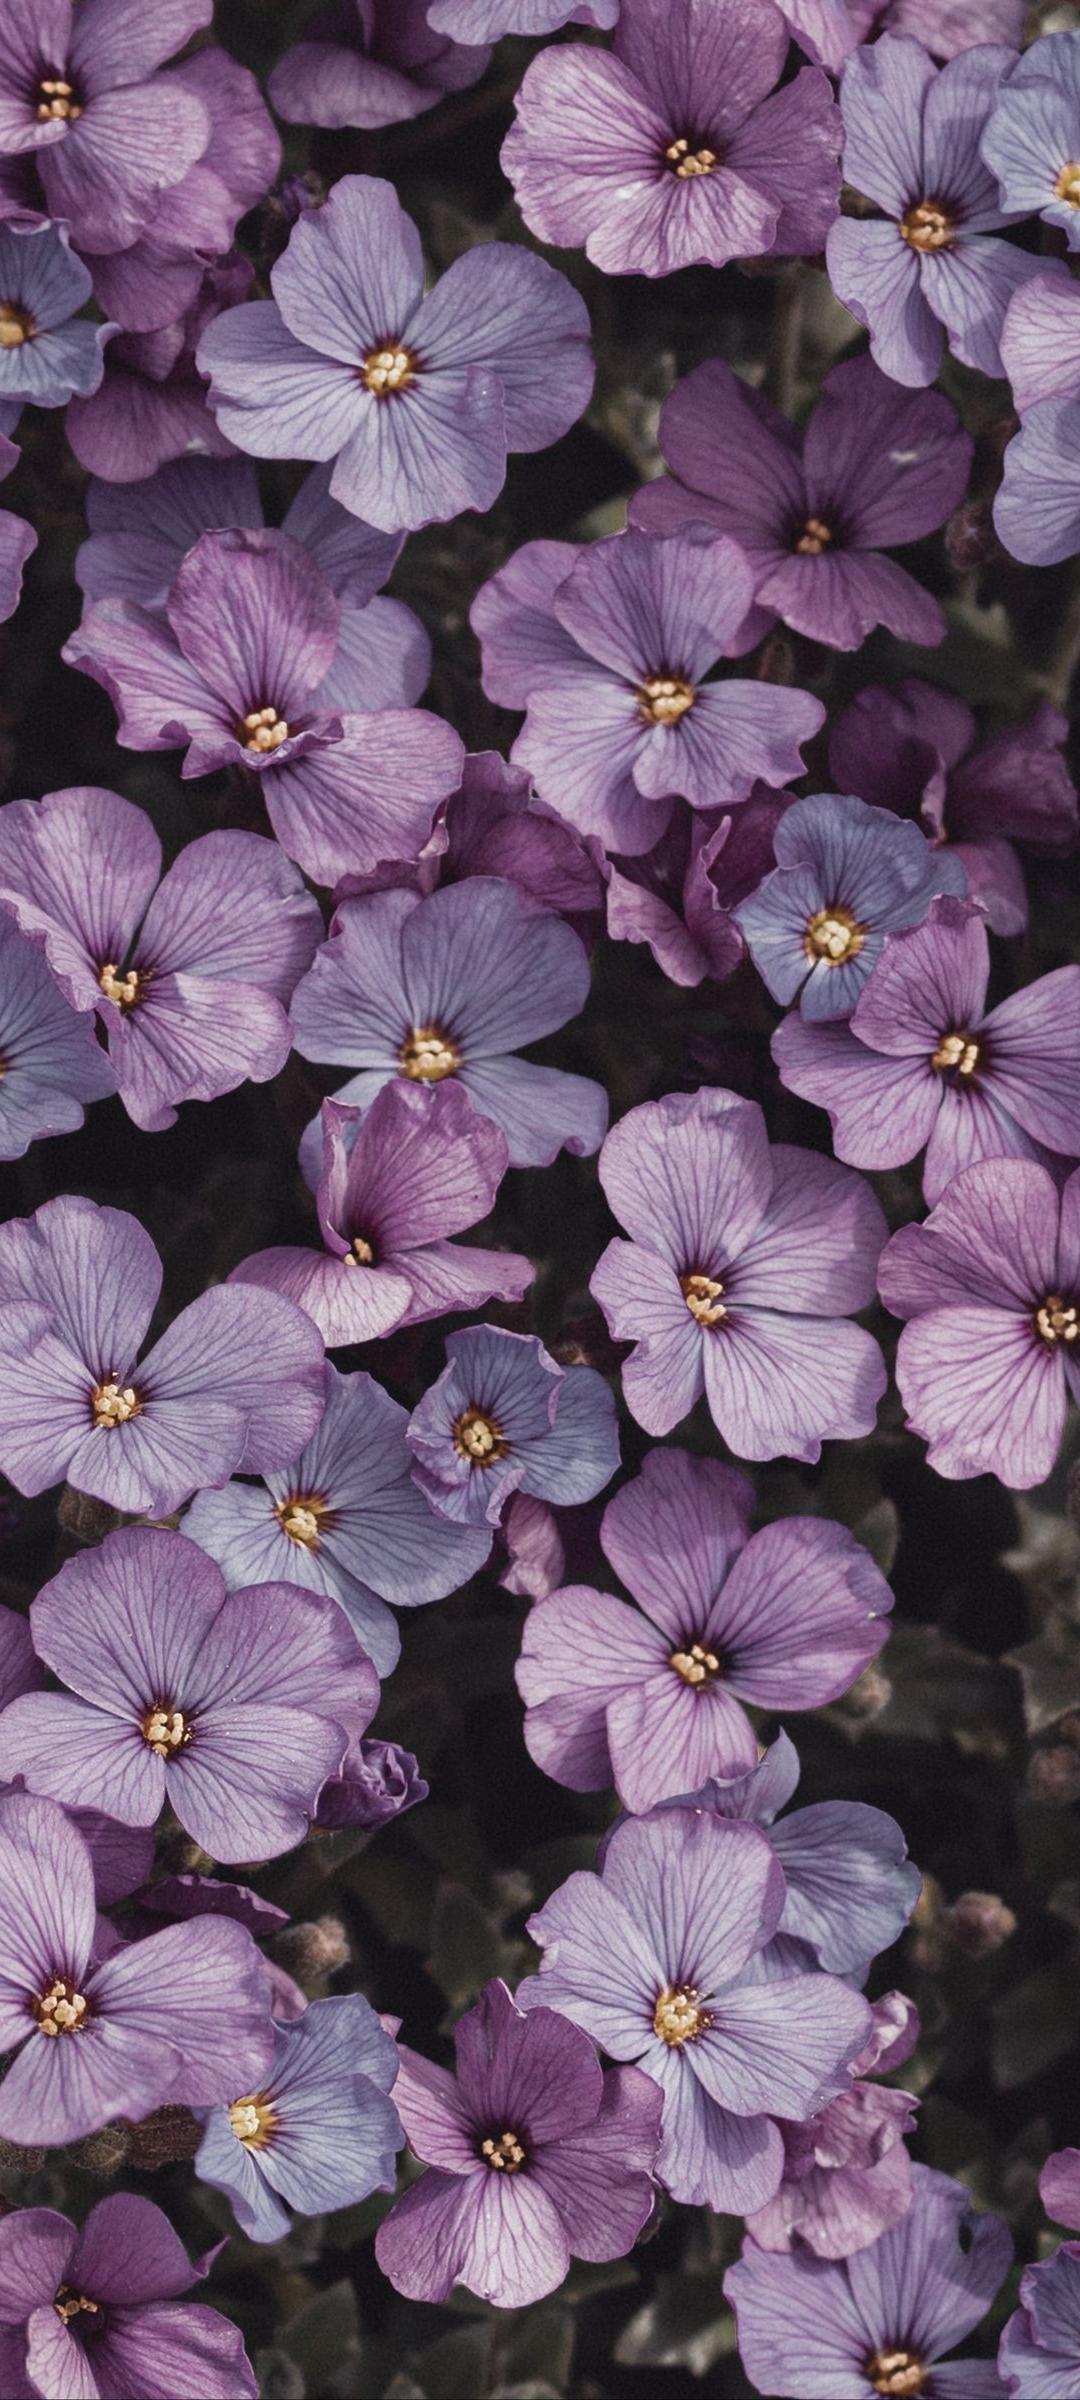 A close up of some purple flowers - Flower